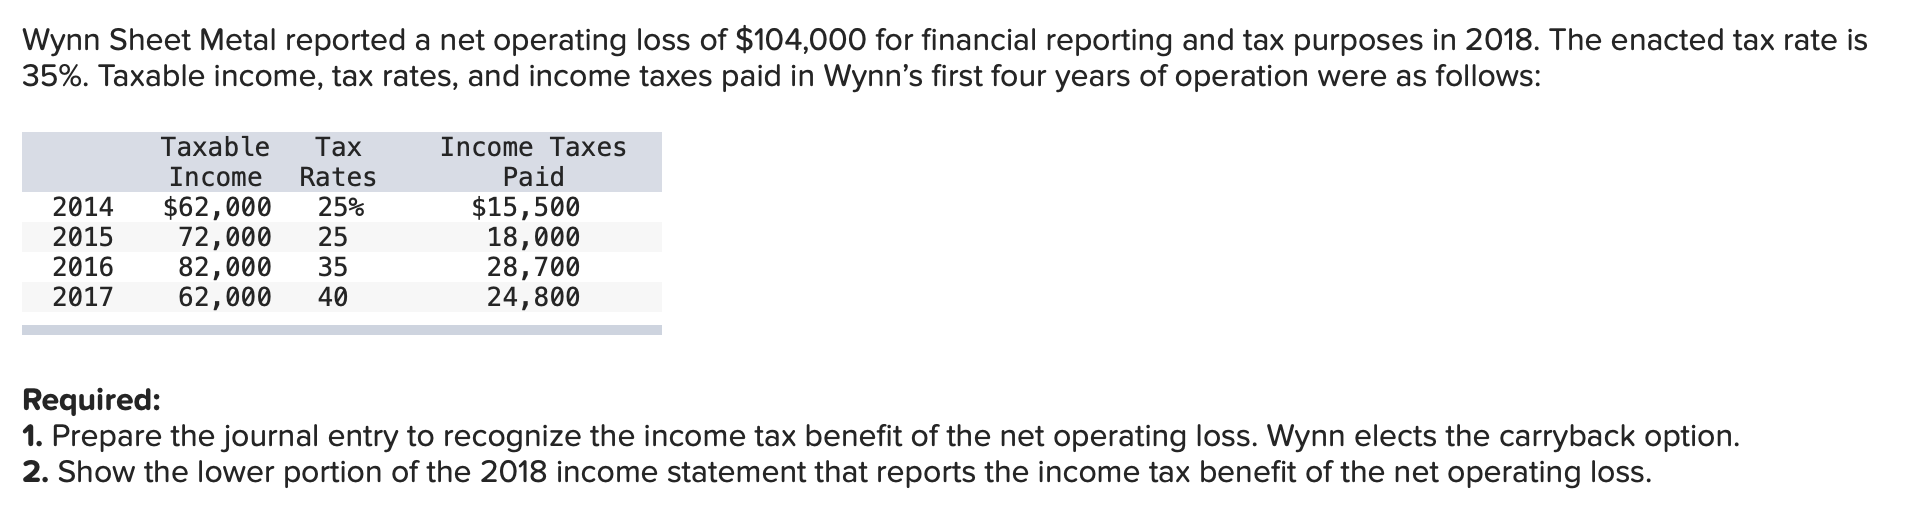 Wynn Sheet Metal reported a net operating loss of $104,000 for financial reporting and tax purposes in 2018. The enacted tax